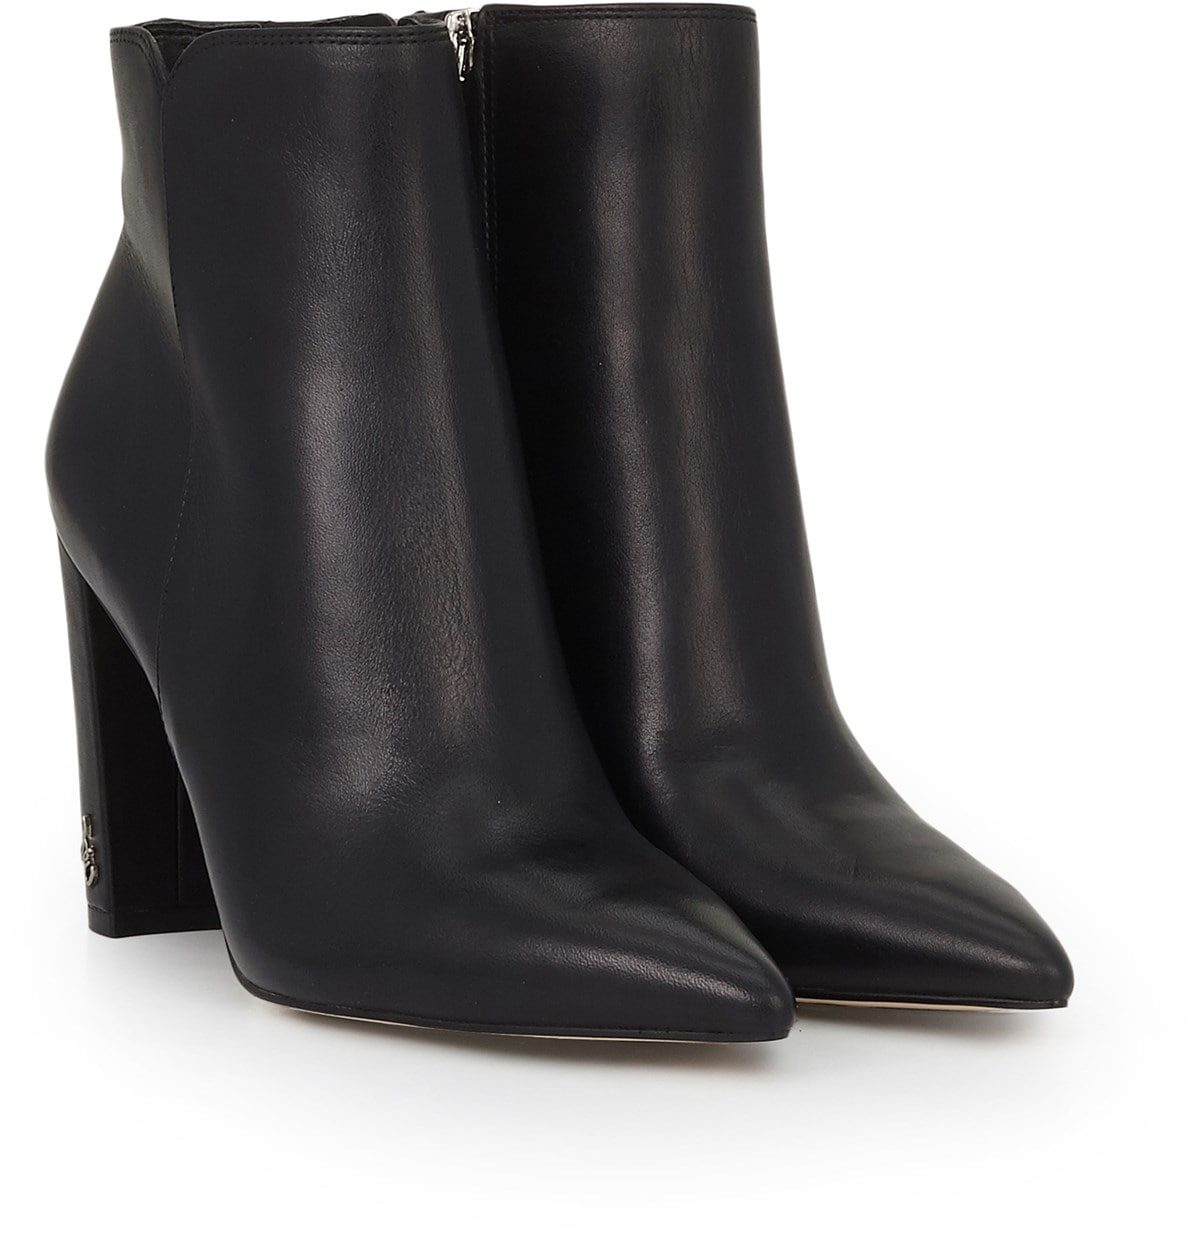 Raelle Pointed Toe Bootie